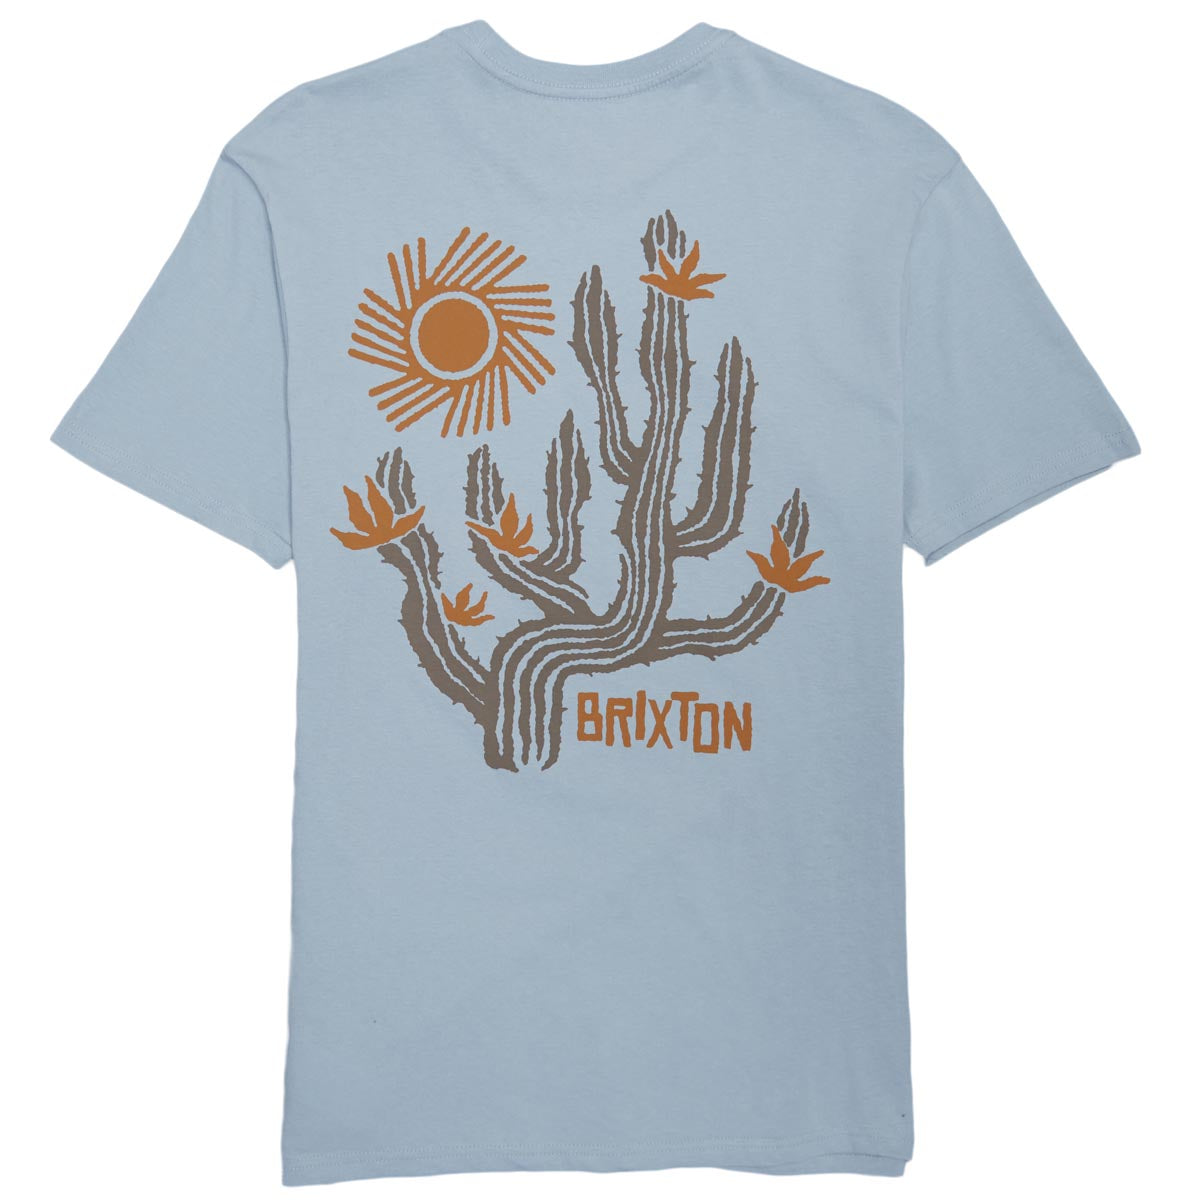 Brixton Valley T-Shirt - Dusty Blue image 1